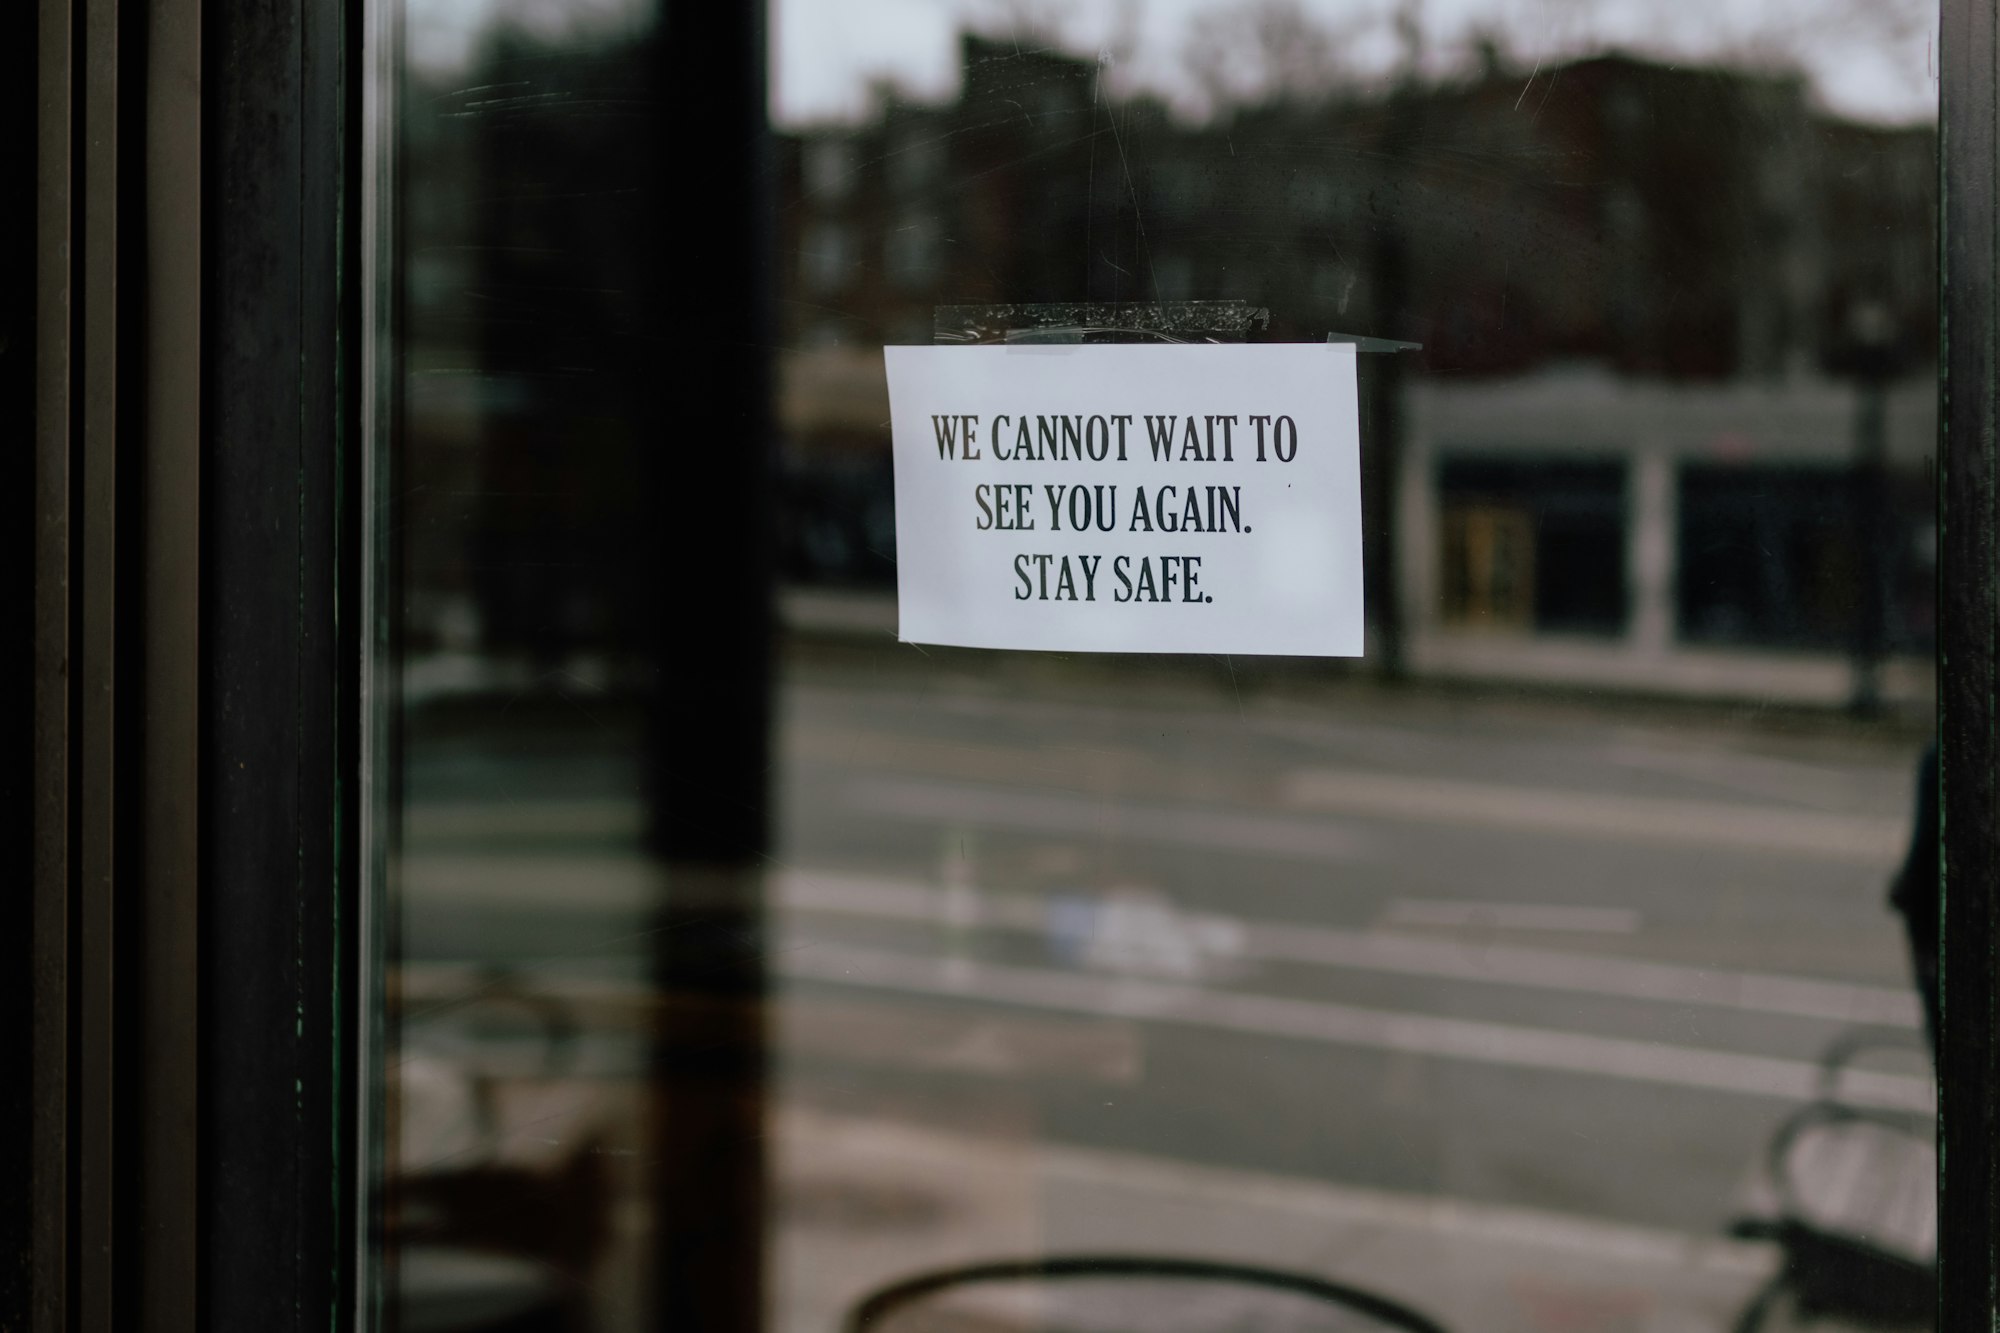 Restaurant closed sign - stay safe